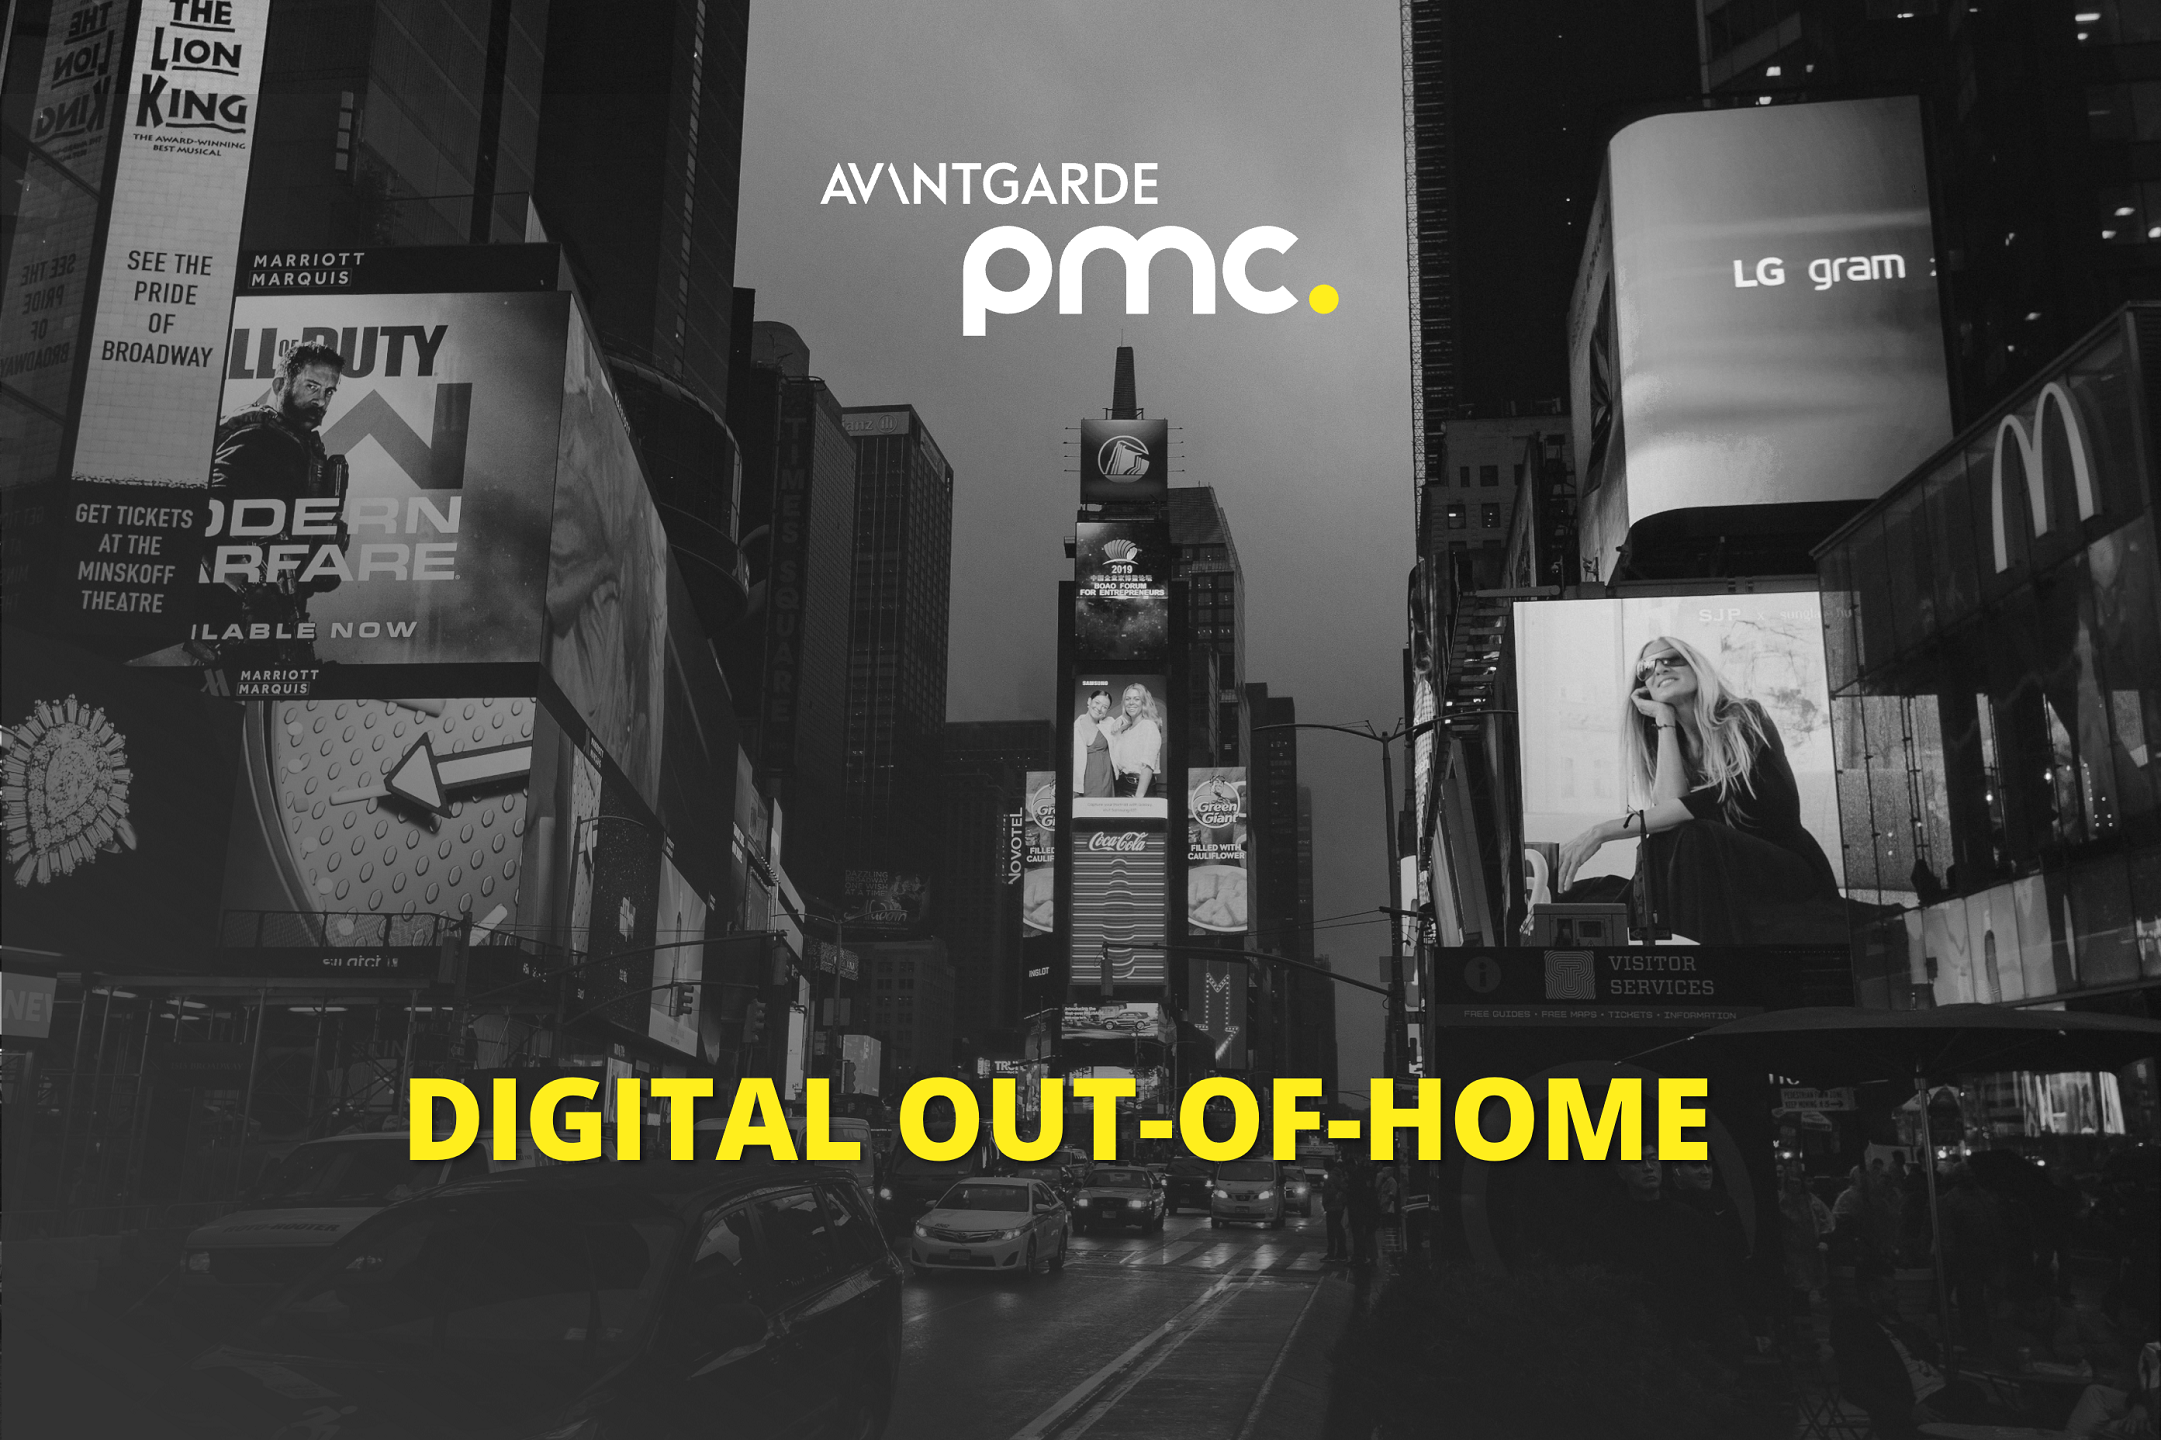 AVANTGARDE PMC Intro in Digital Out-of-Home - Digitale Außenwerbung